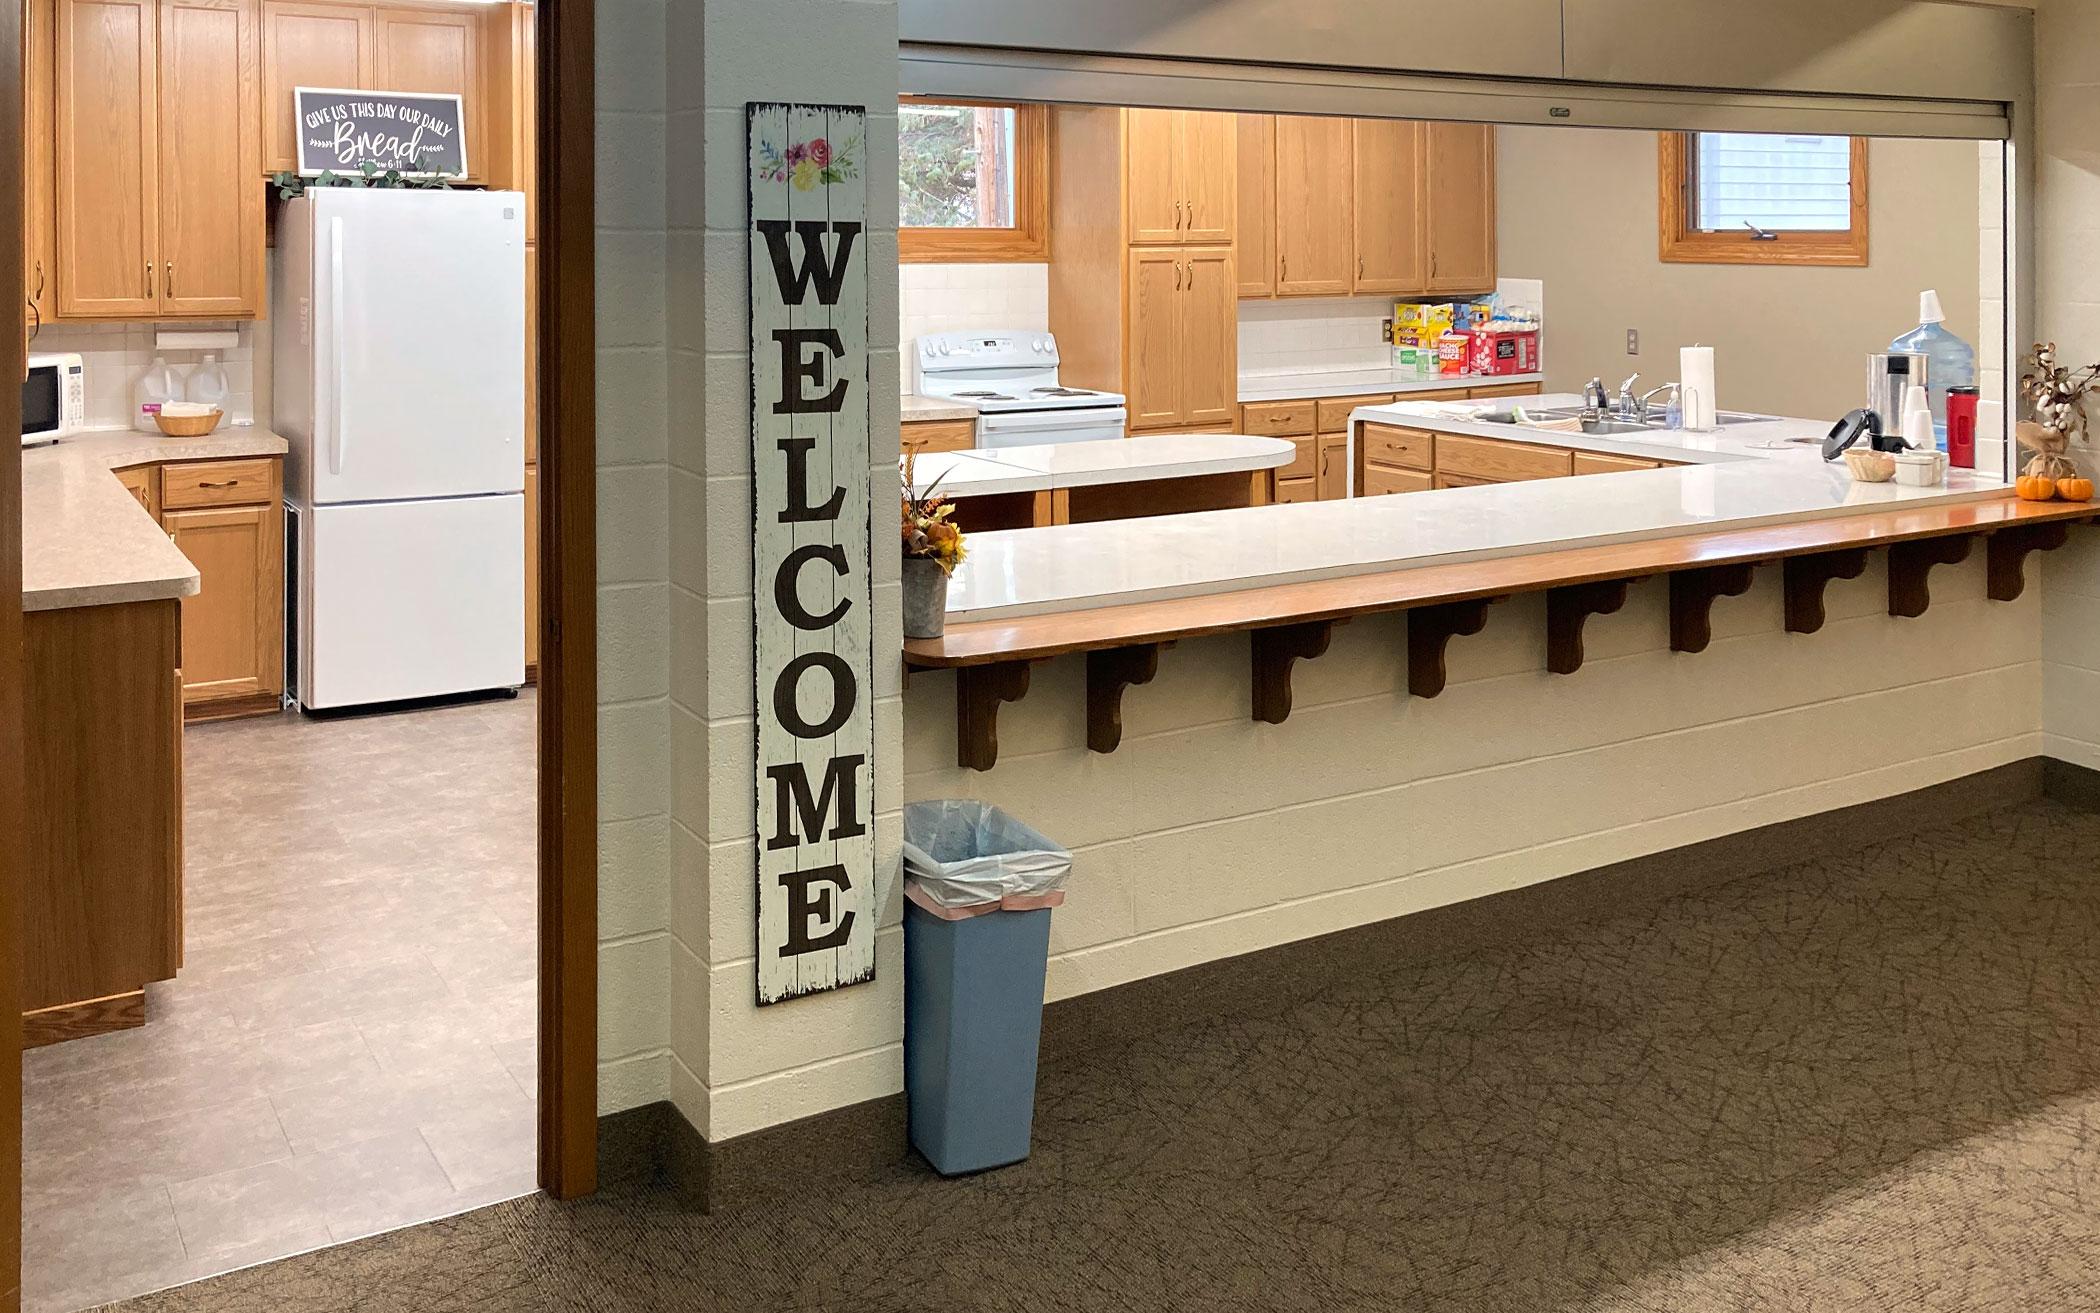 Emden Christian Reformed Church’s renovated kitchen helps members to welcome the community.